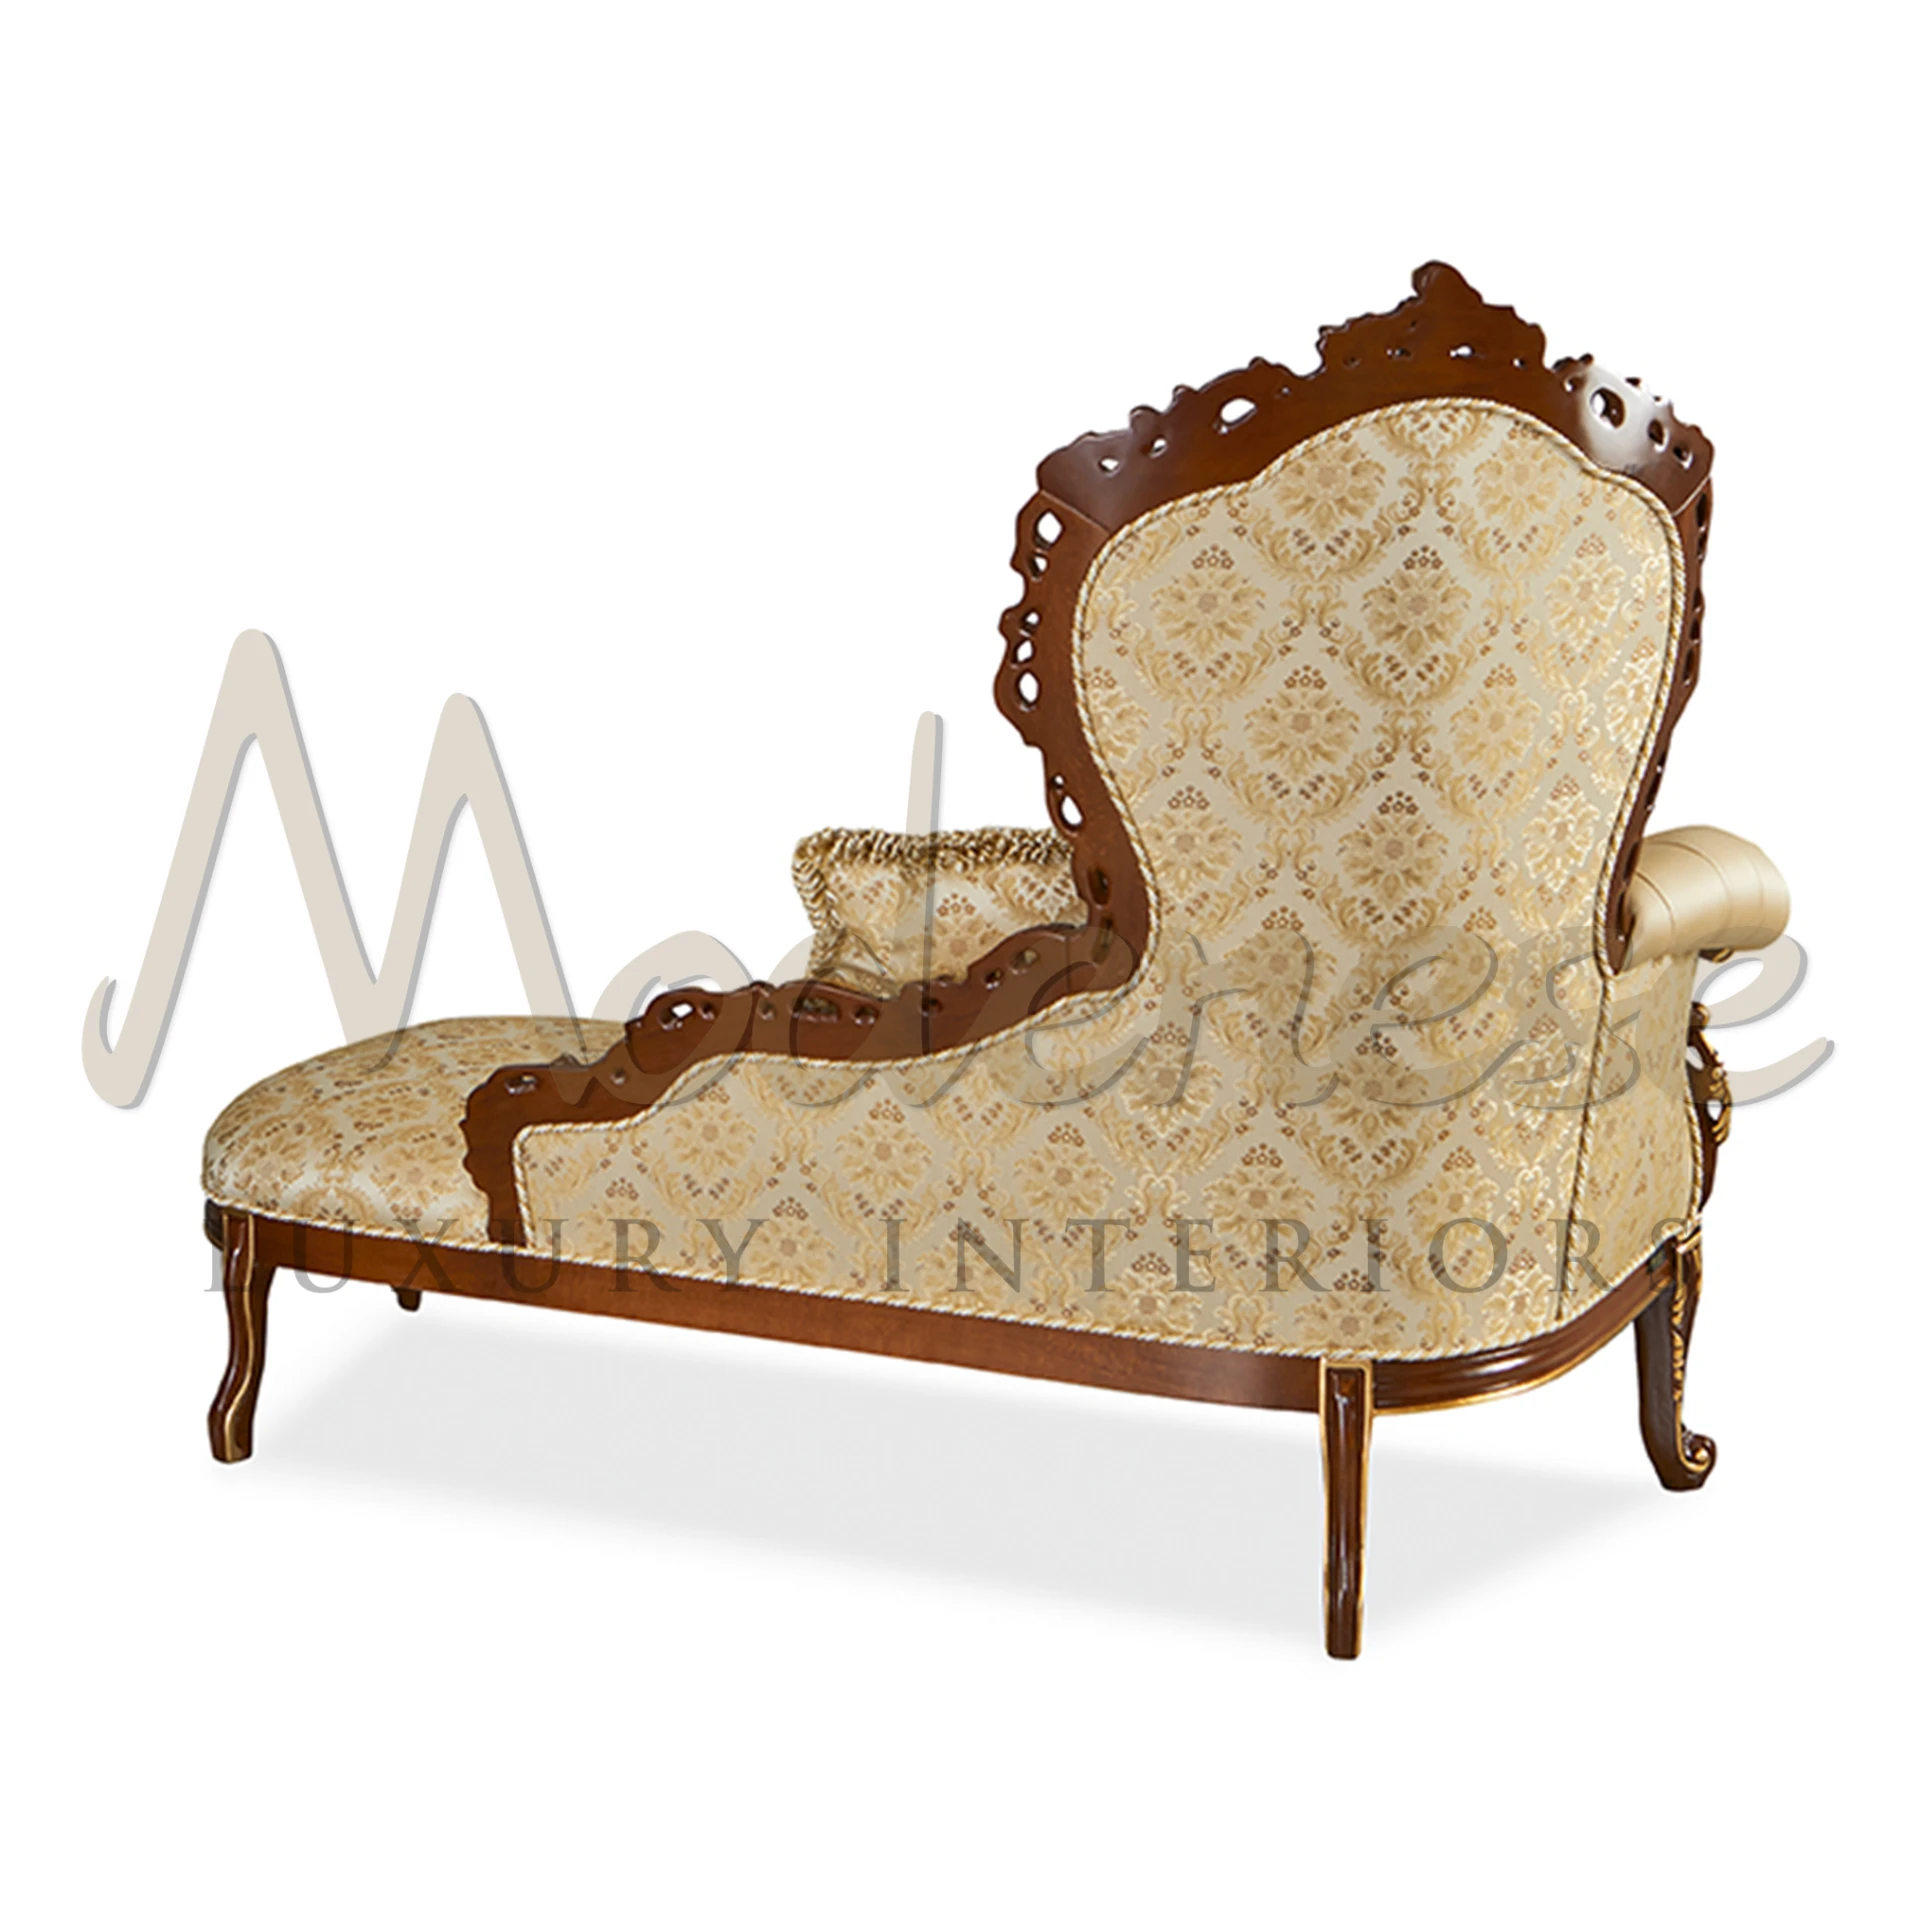 The image shows the back of the beautiful chaise lounge in wooden structure, gold leaf decor and beige floral fabric